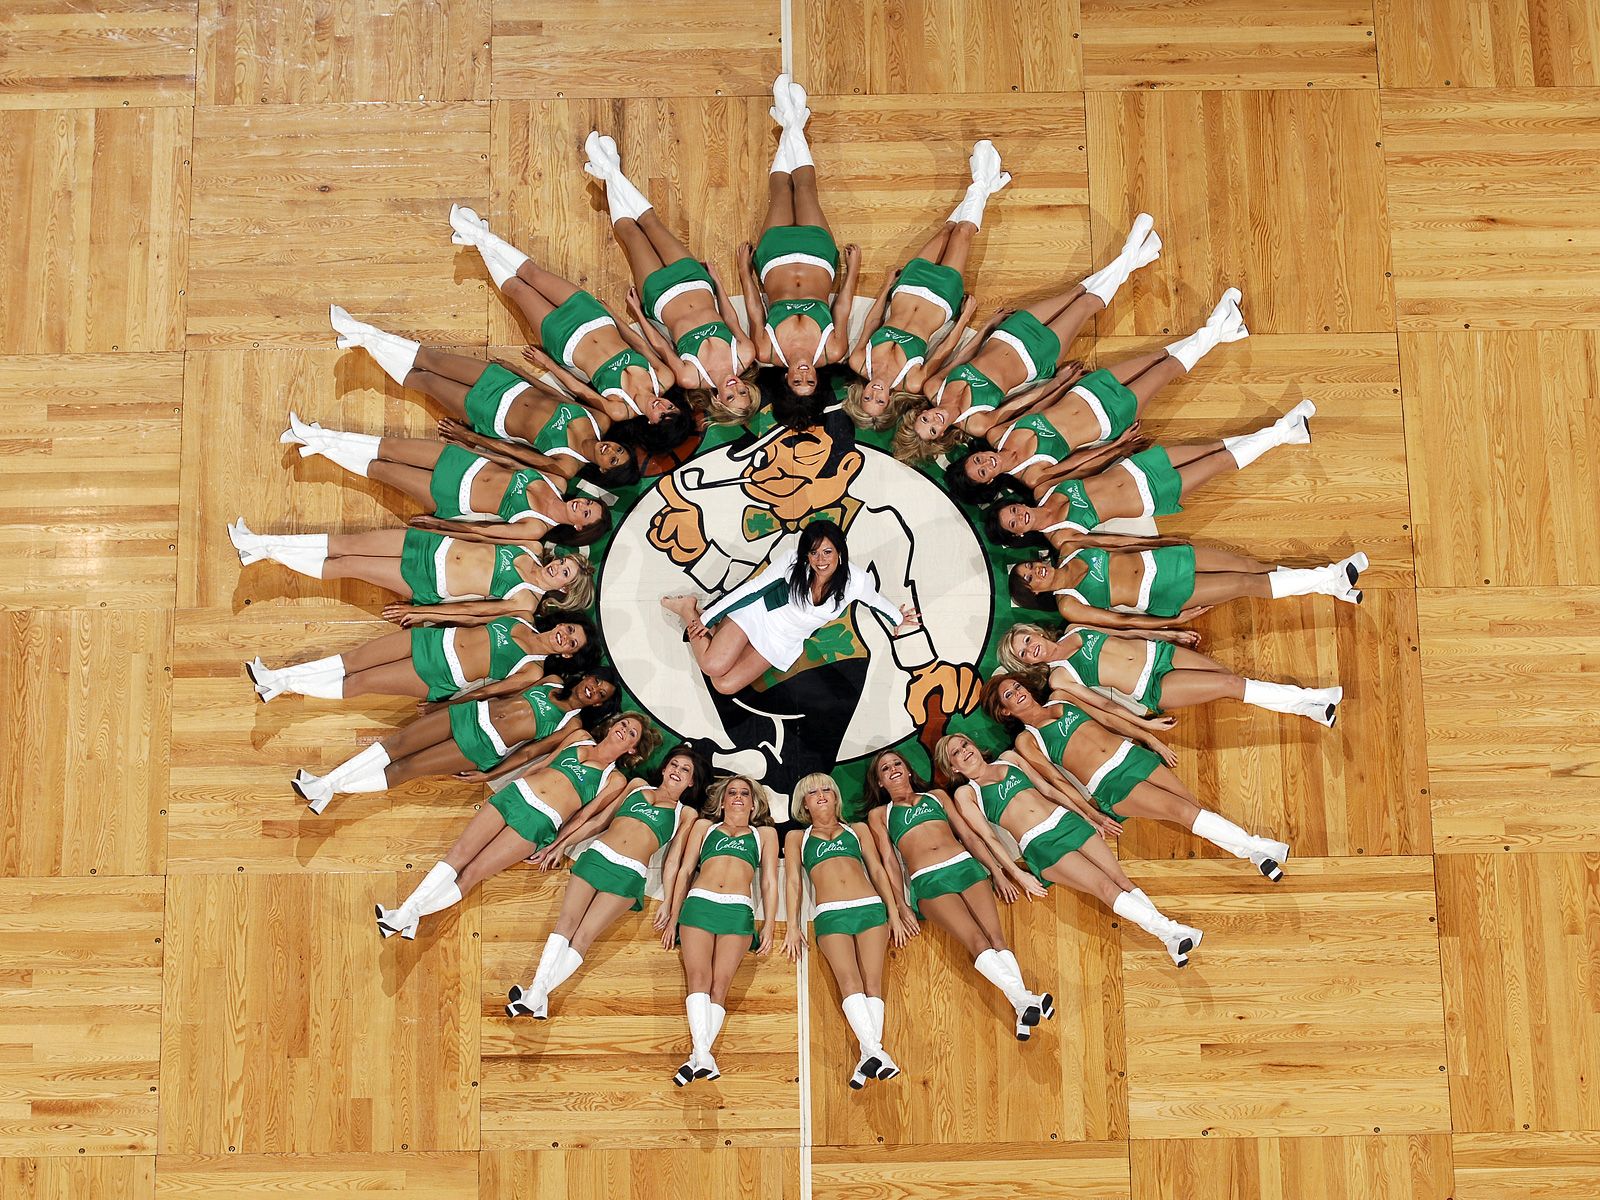 Celtics Dancers - Team Wallpaper The Official Site of the BOSTON